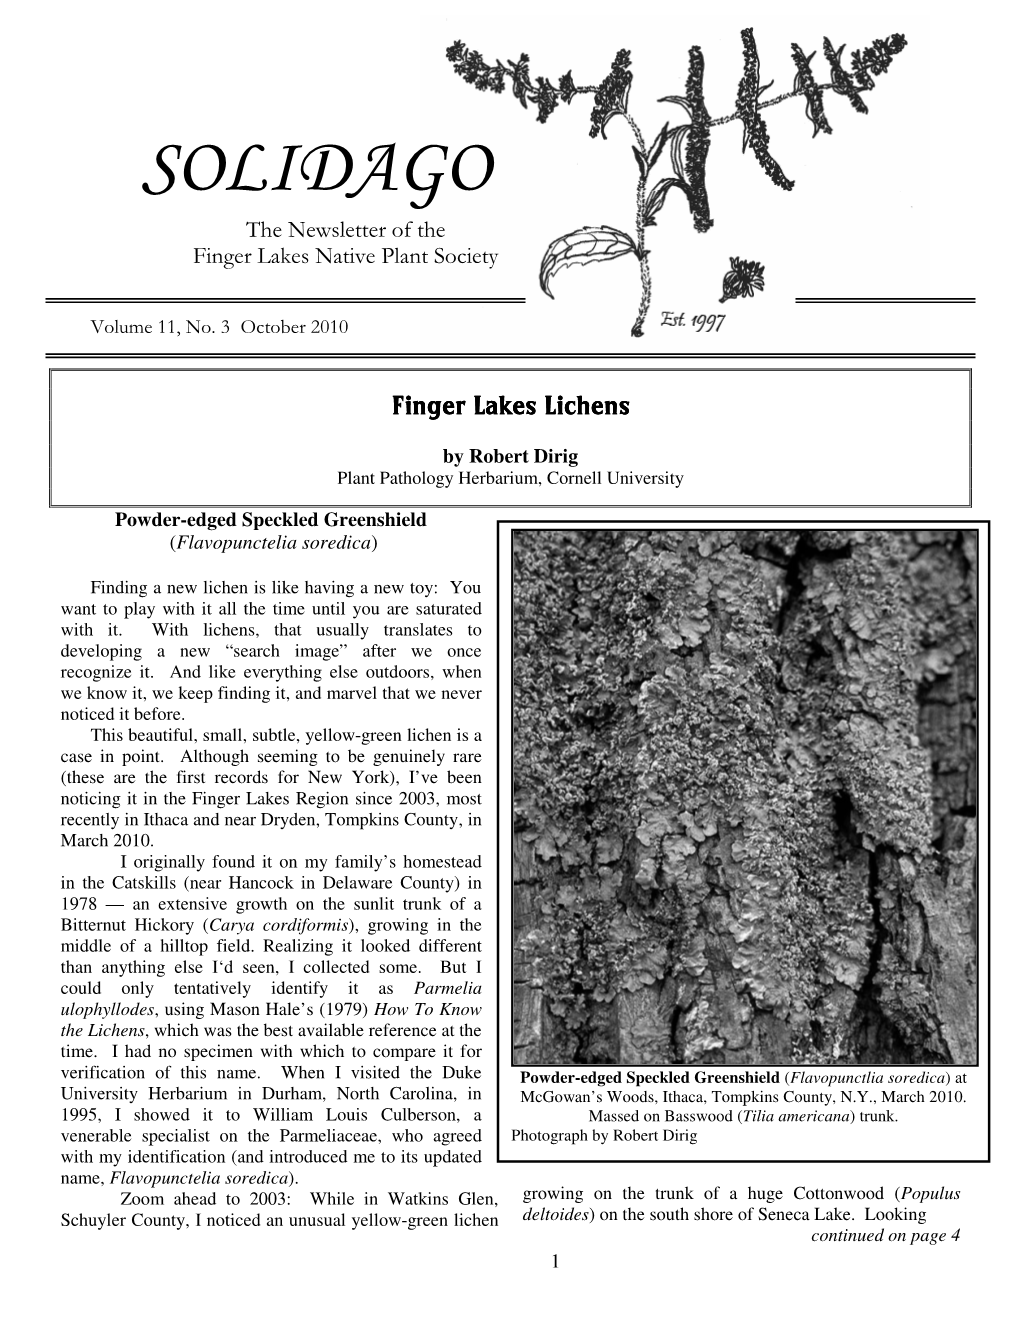 SOLIDAGO the Newsletter of The